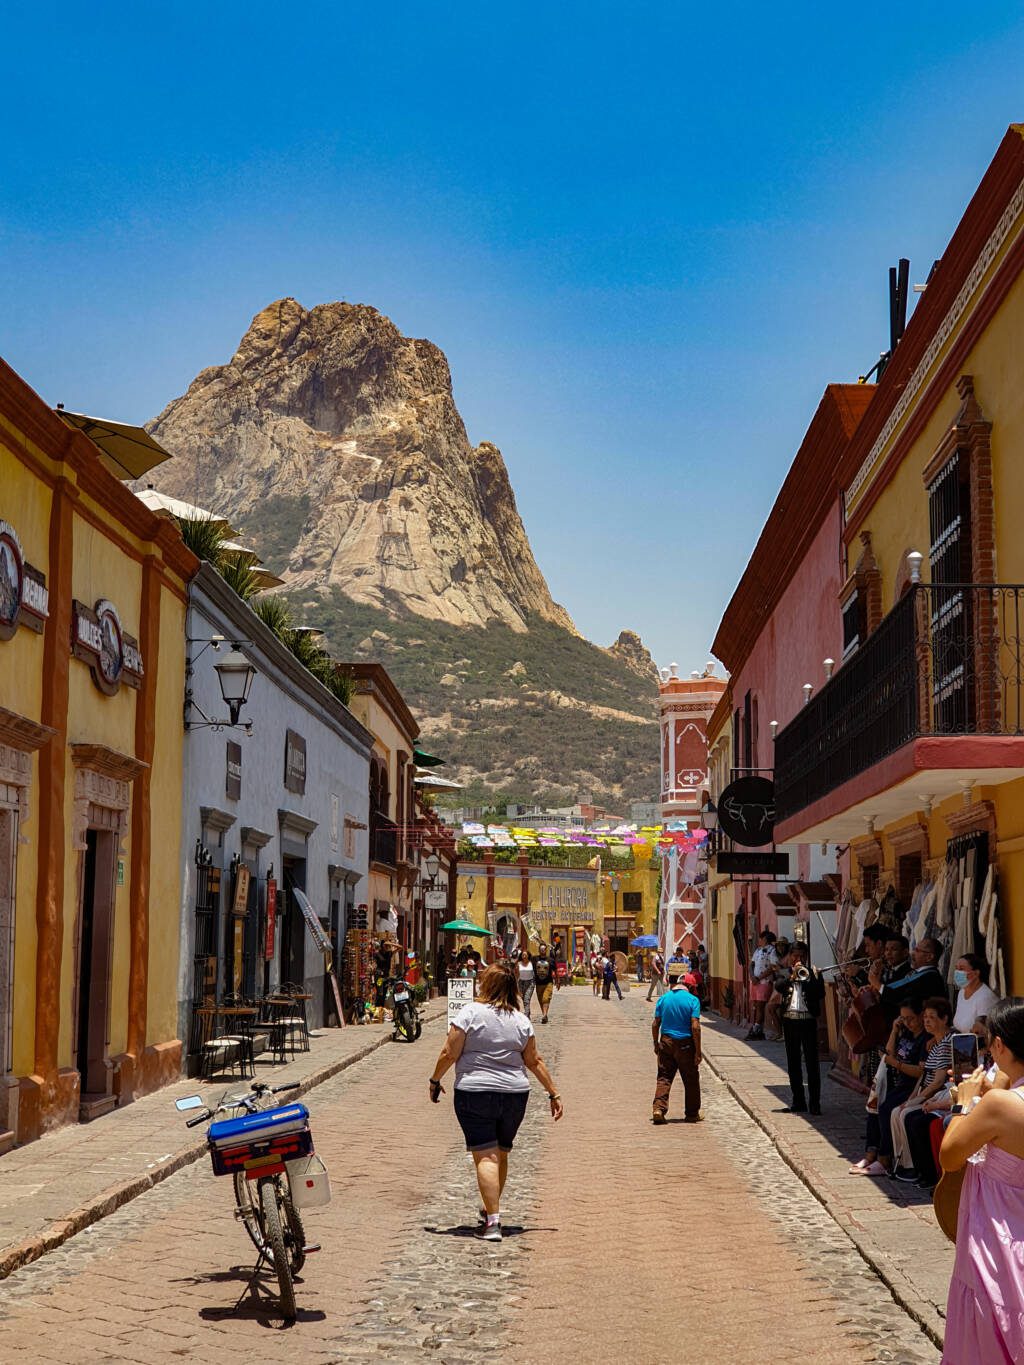 Bernal, a charming pueblo mágico, showcasing its rich cultural heritage and breathtaking landscapes.